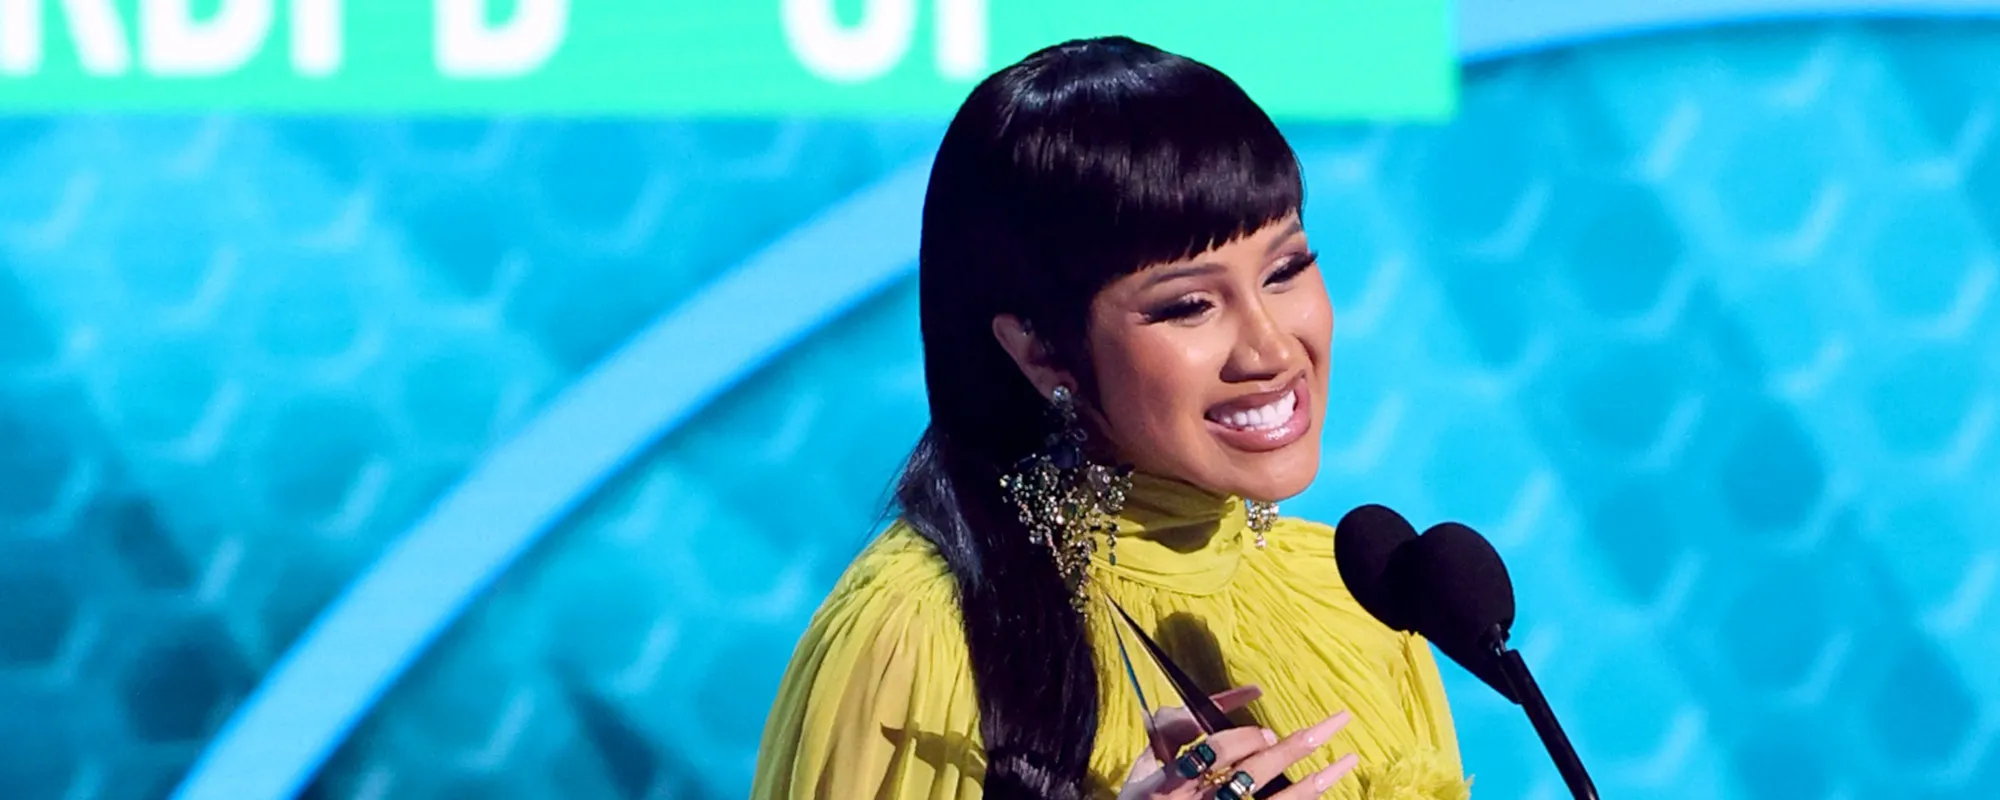 Cardi B Shares Career-Spanning Video While Hinting at New Music